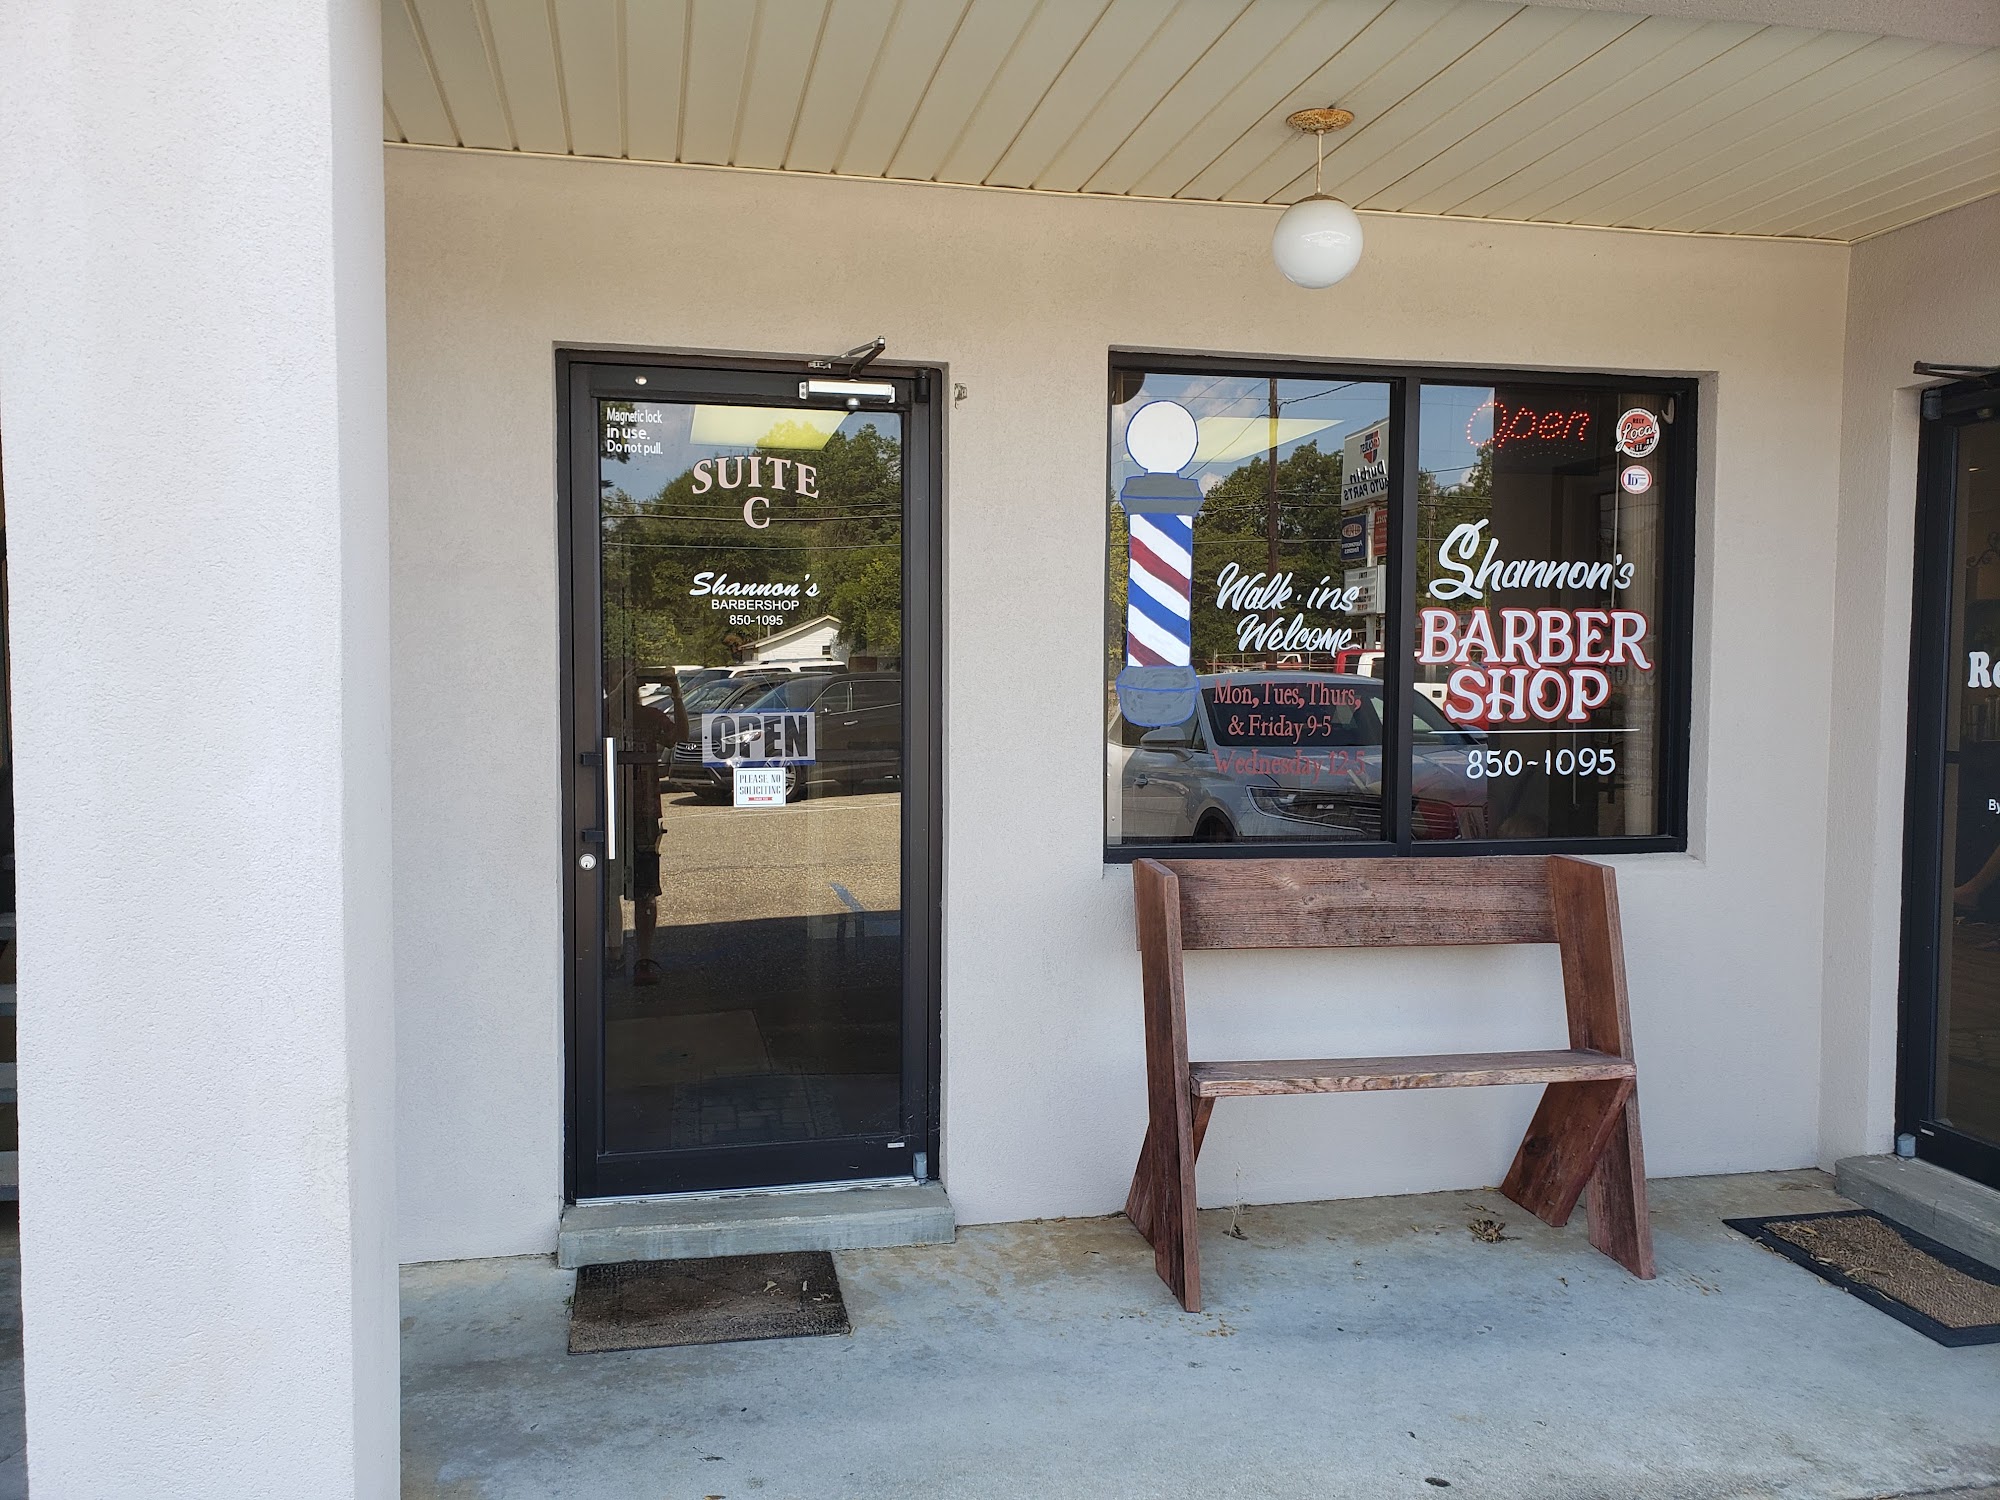 Shannon's Barbershop (by appointment only)